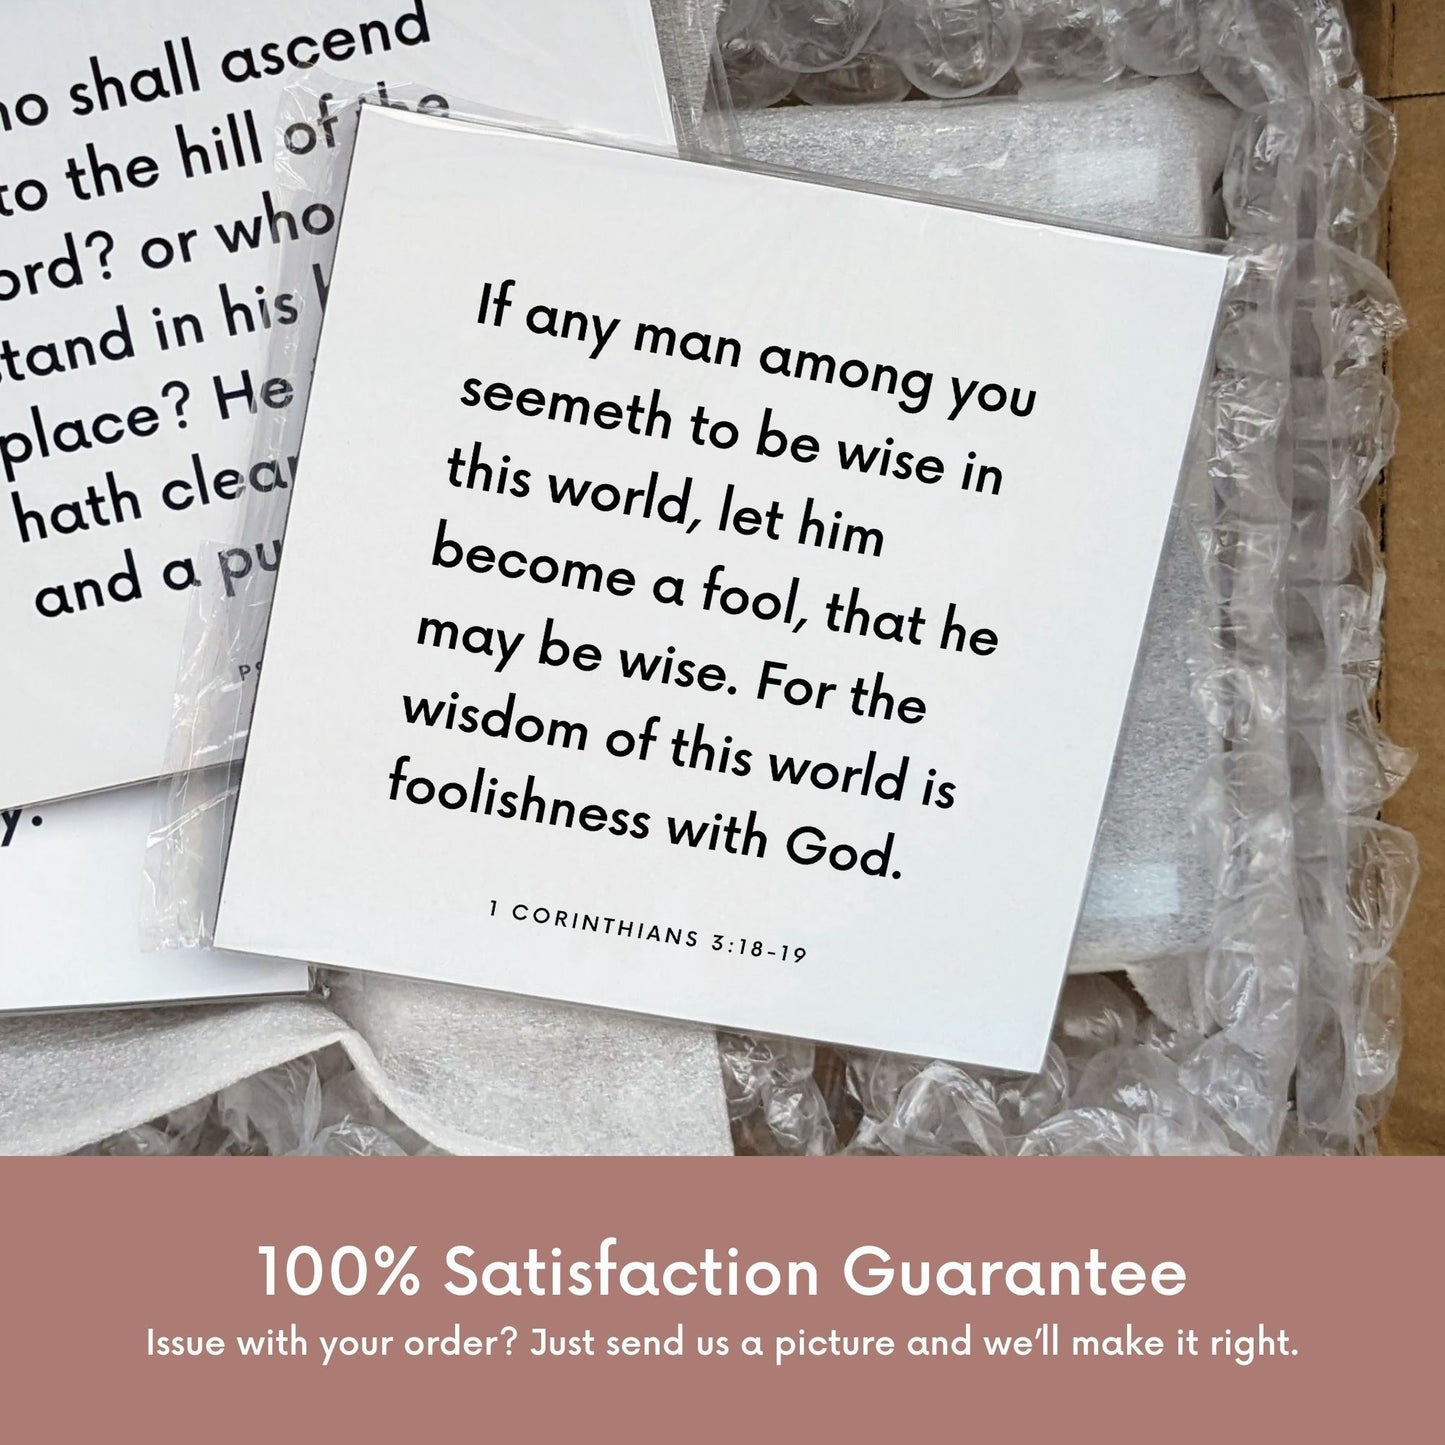 Shipping materials for scripture tile of 1 Corinthians 3:18-19 - "The wisdom of this world is foolishness with God"